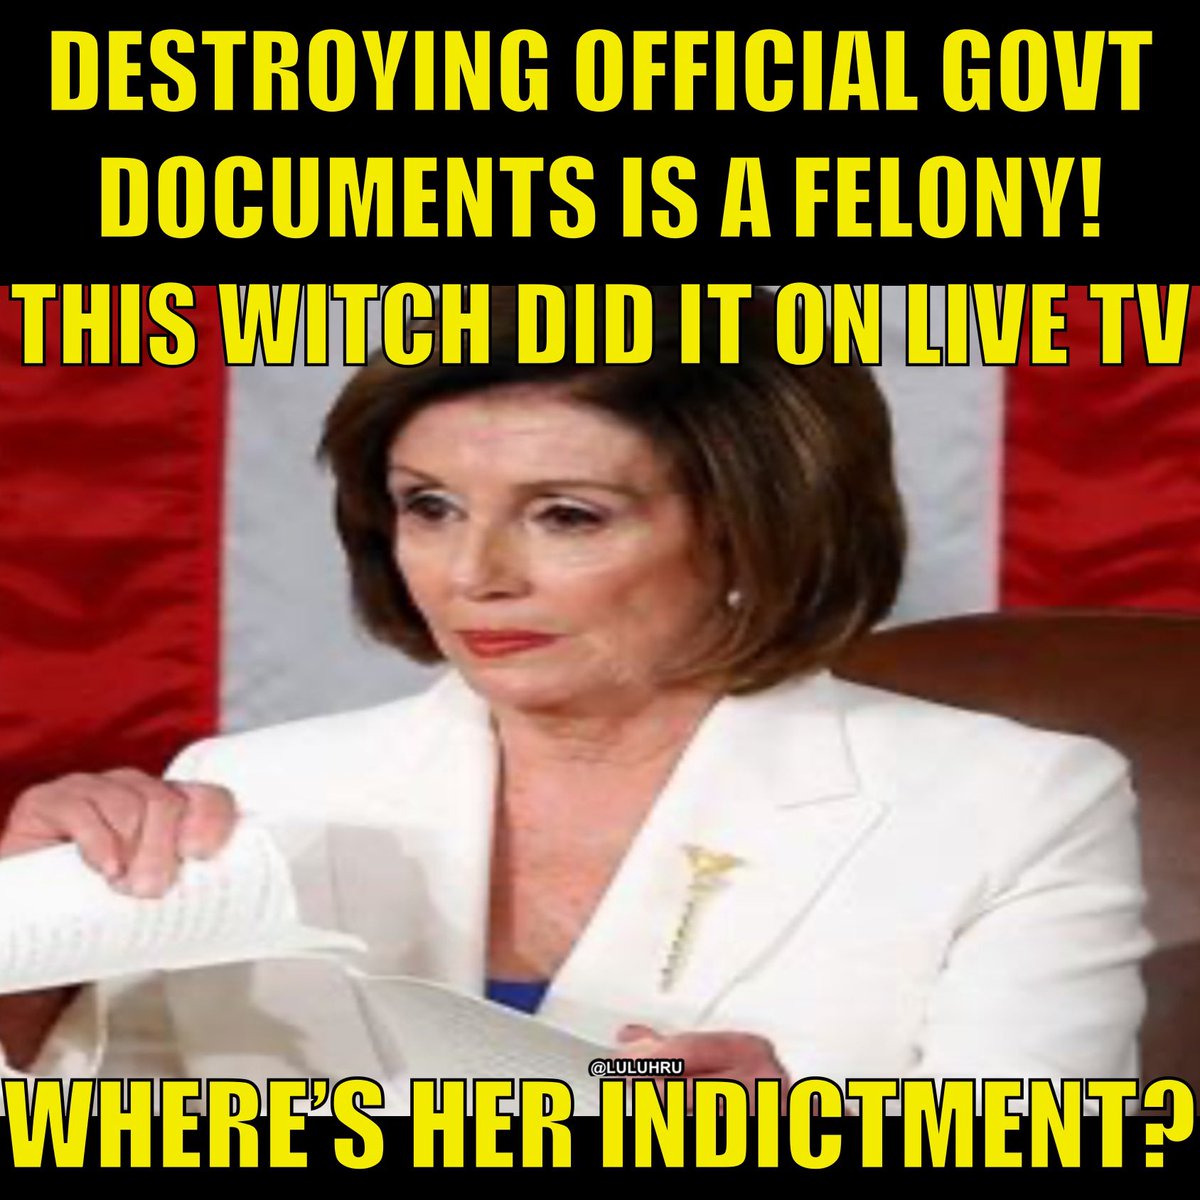 Pelosi commits a felony on live tv with millions watching she’s not worried though, cuz she’s a democrat!